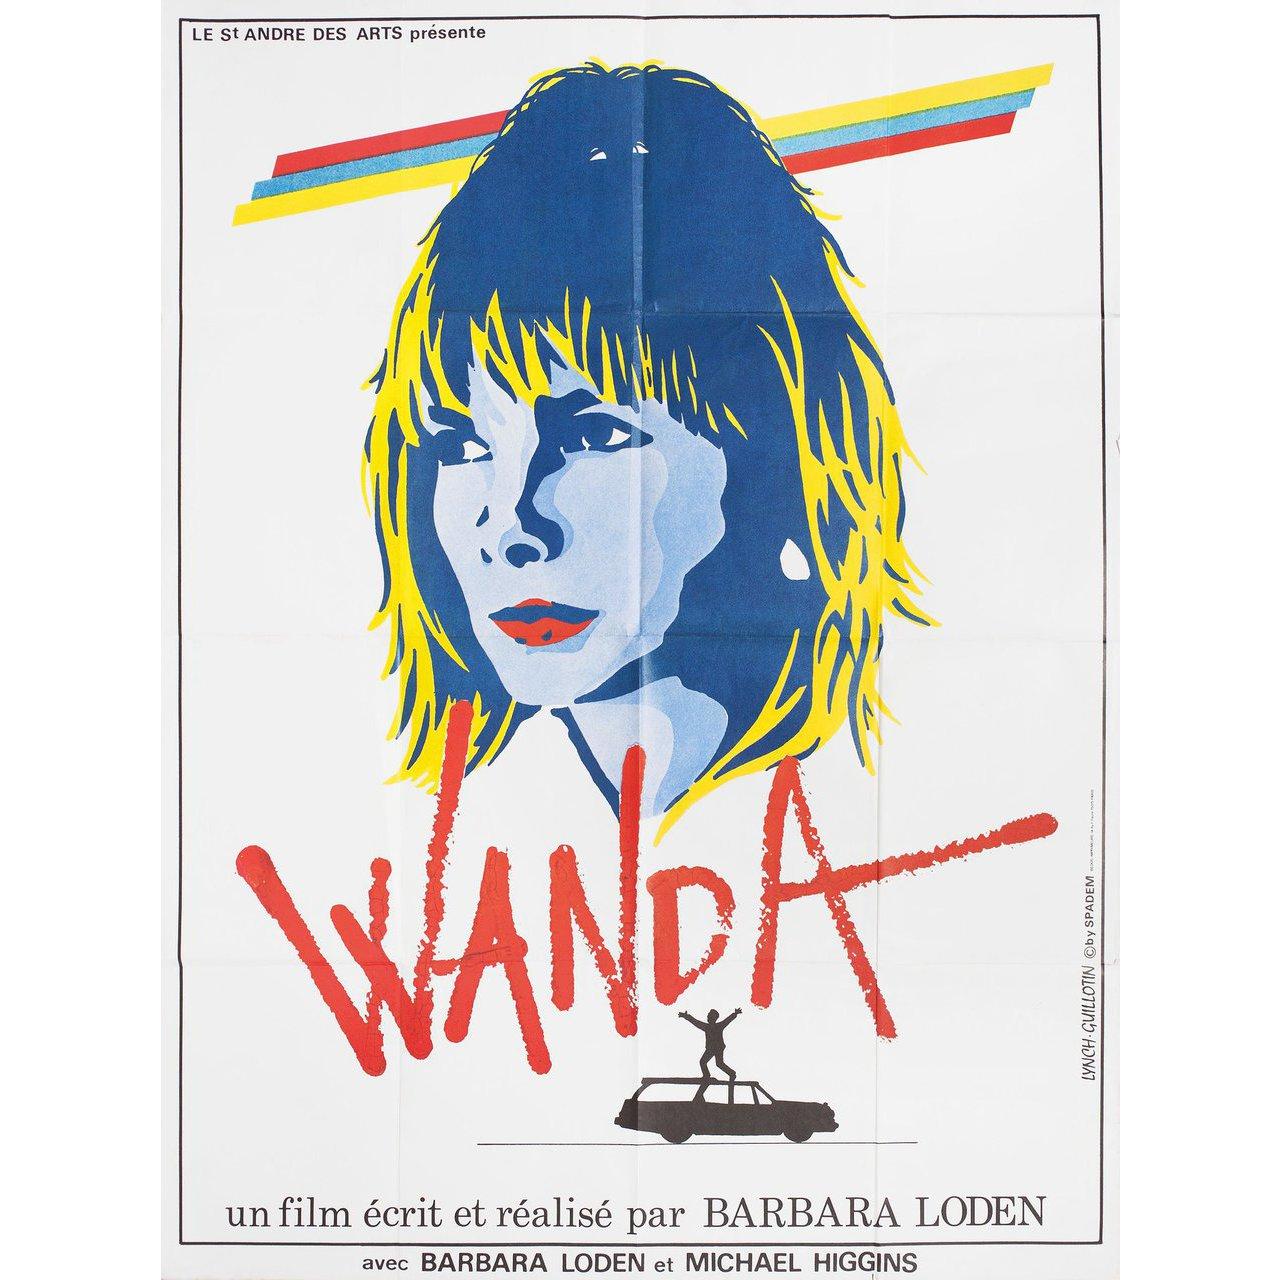 Original 1982 French grande poster by Lynch-Guillotin for the first French theatrical release of the 1970 film Wanda directed by Barbara Loden with Barbara Loden / Michael Higgins / Dorothy Shupenes / Peter Shupenes. Very Good condition, folded with